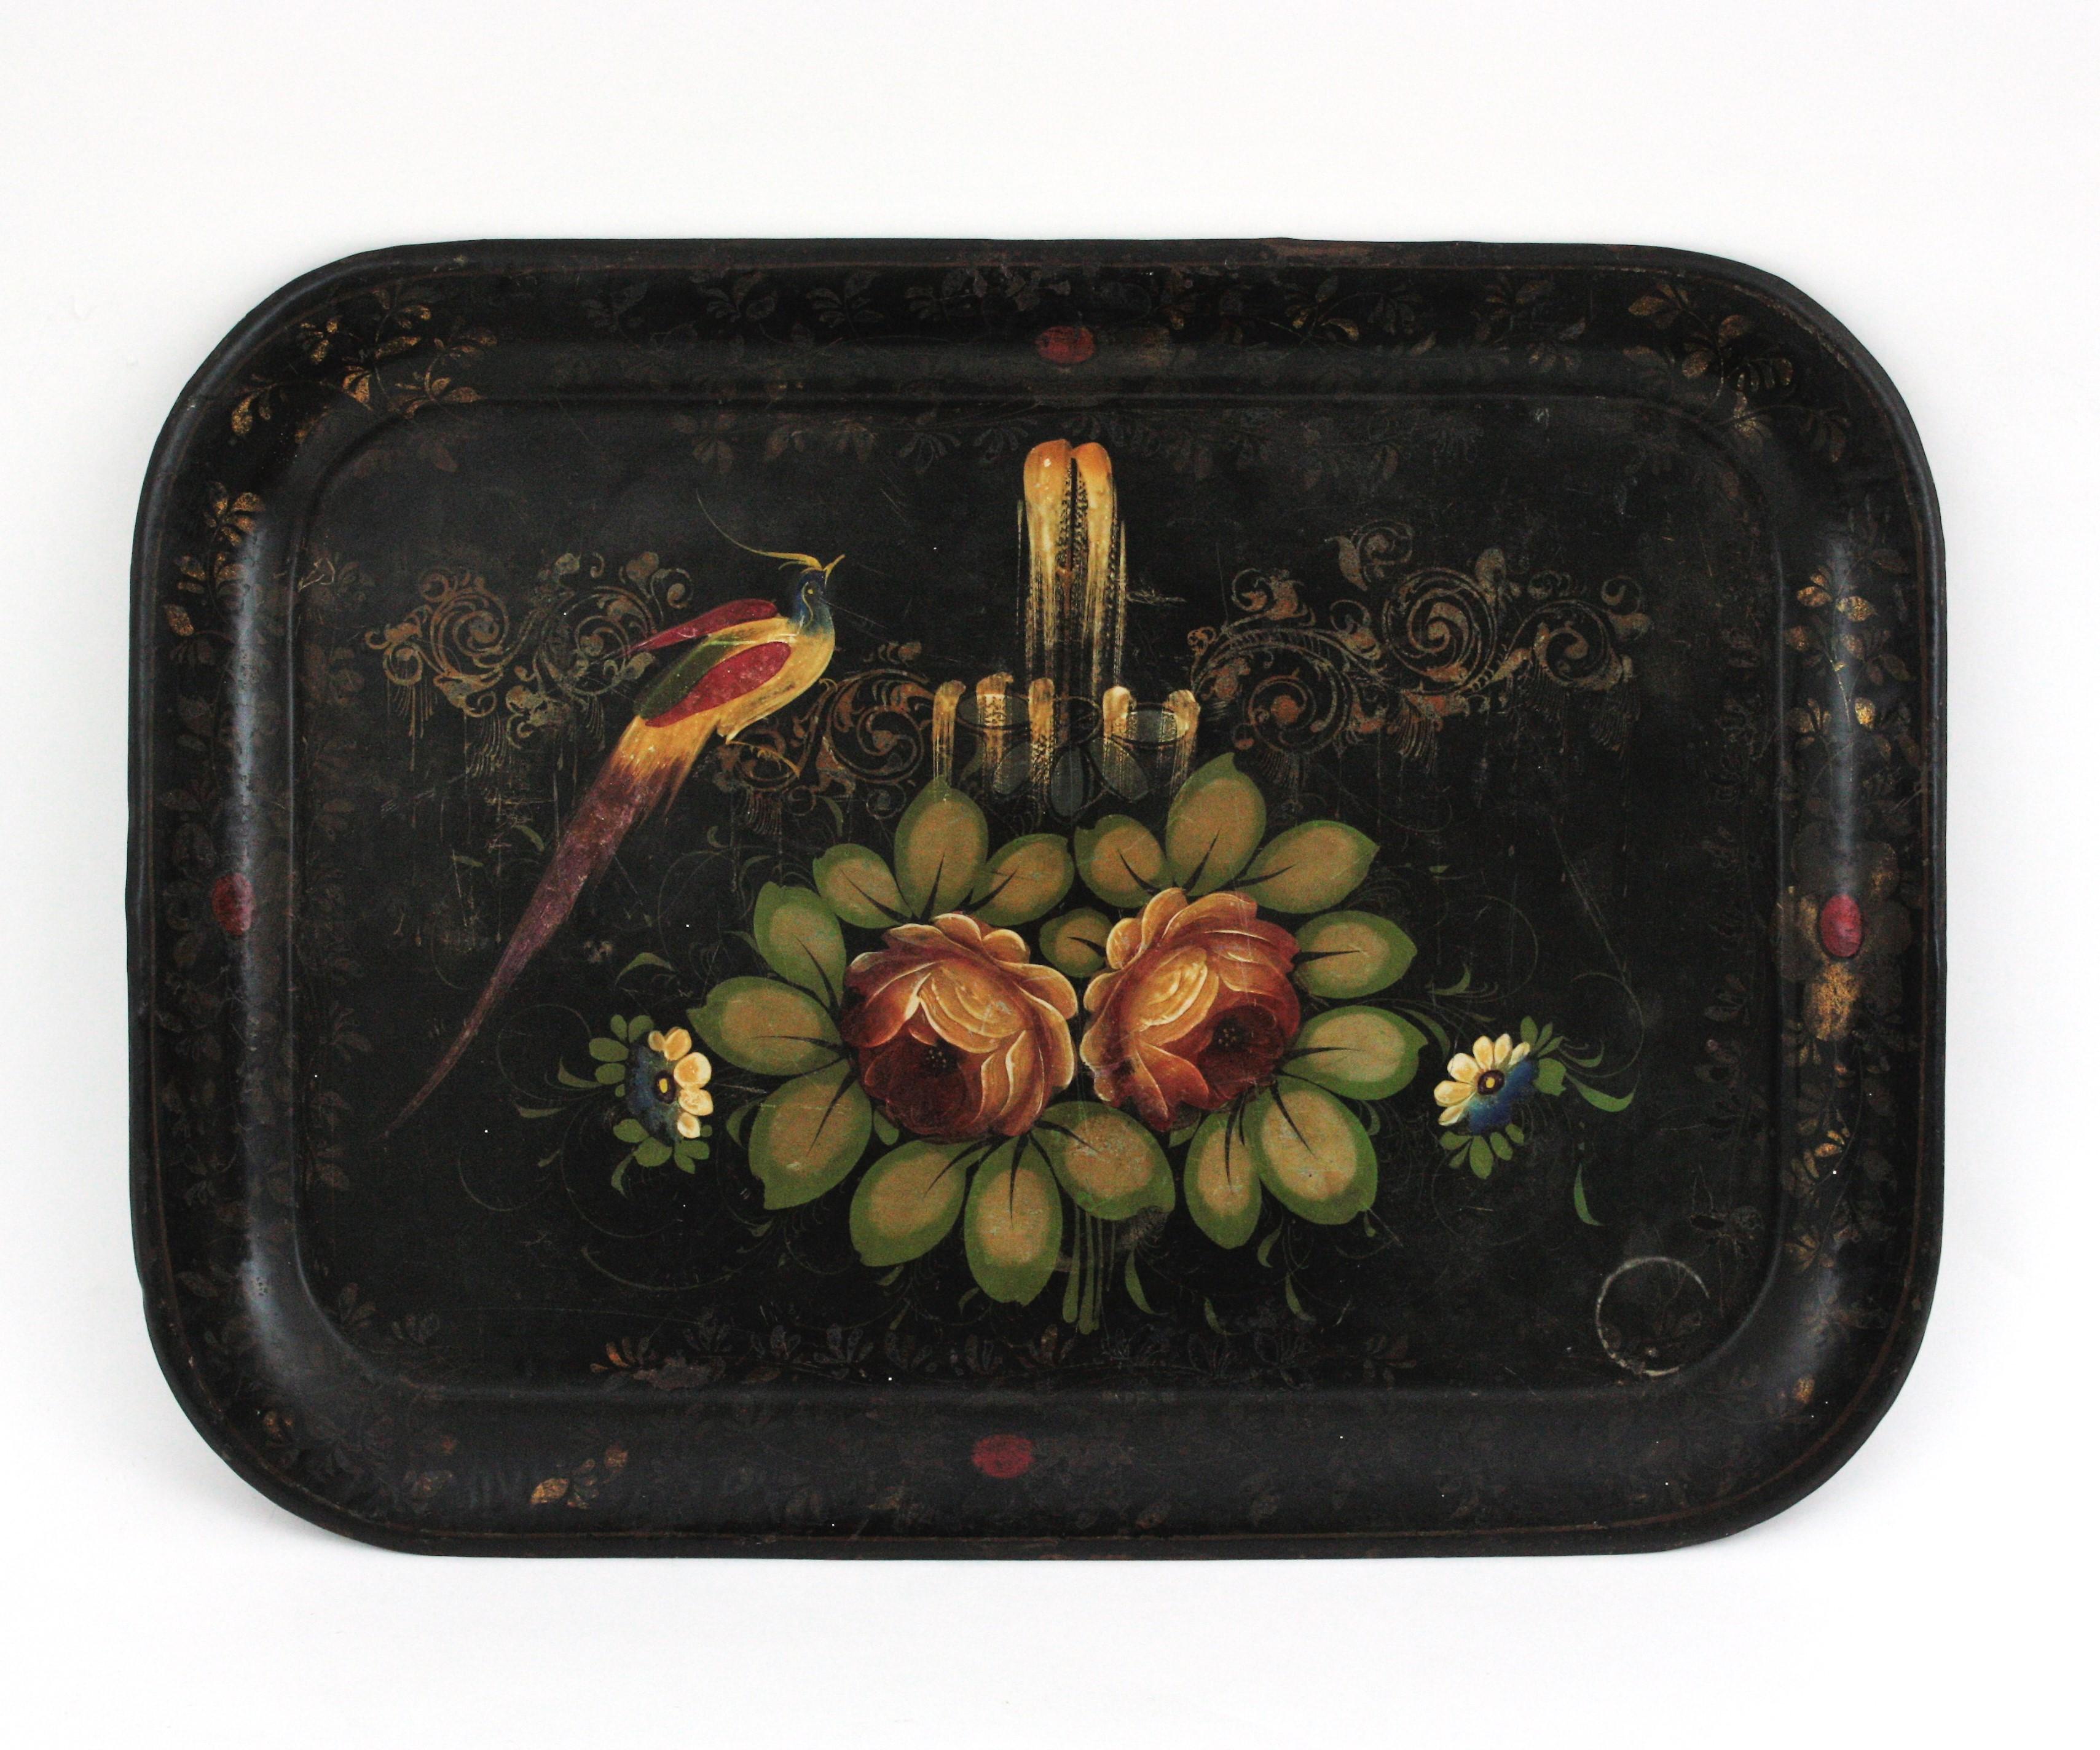 Spanish hand-painted black metal decorative tole tray, 1930s
Victorian style Tole tray with polychrome hand-painted floral and bird motif on a black lacquered background.
Lovely to be used as serving tray or as wall decoration
Good vintage